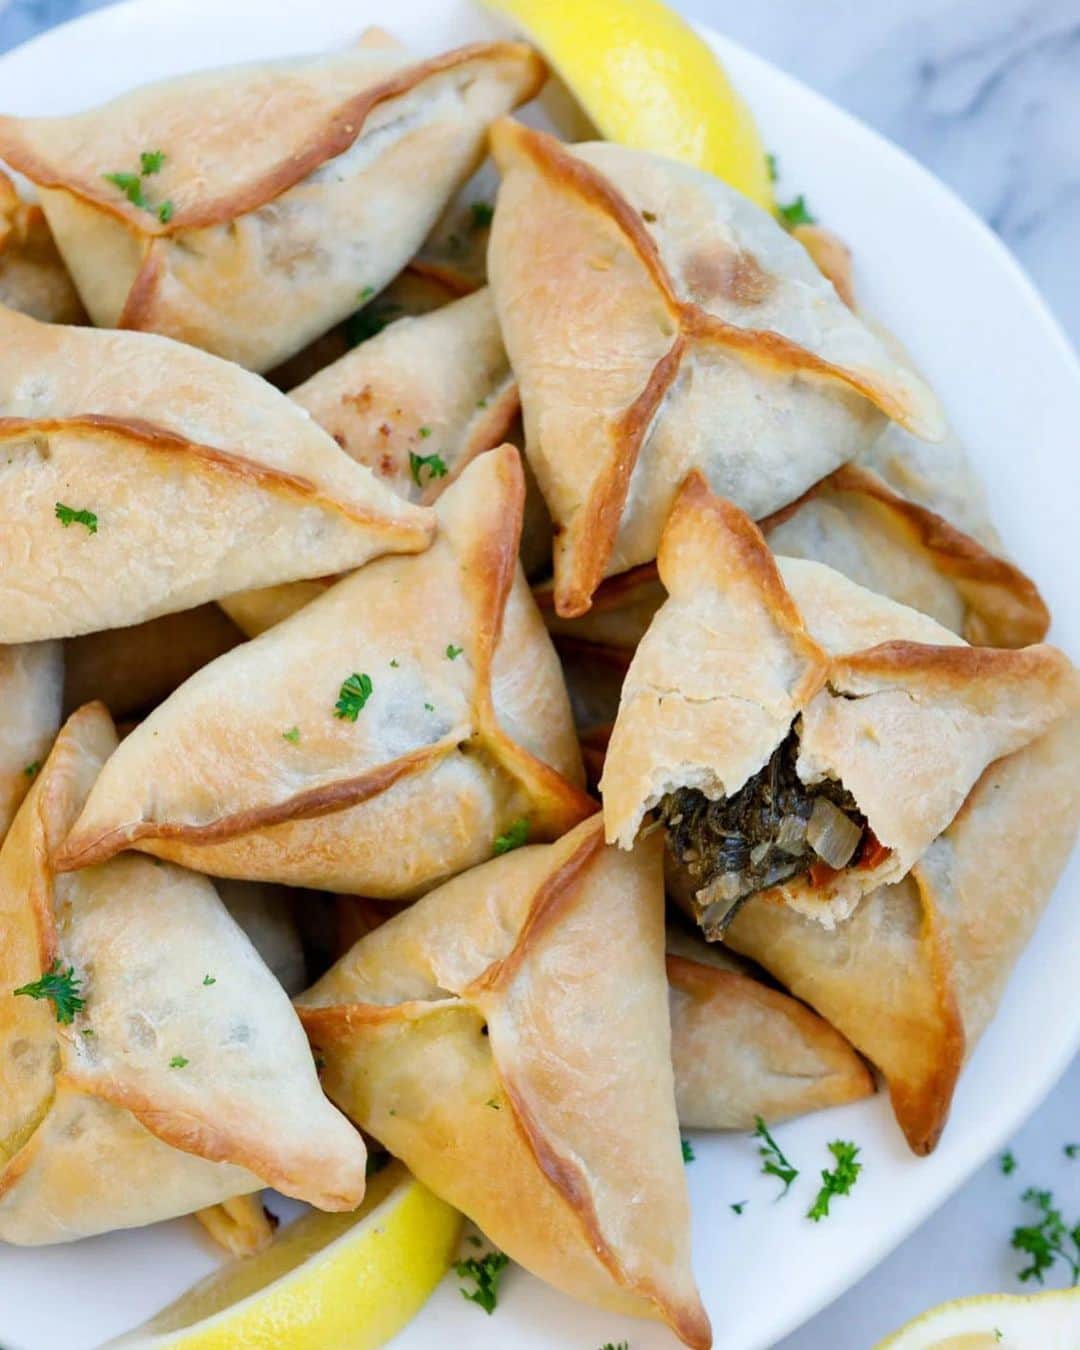 Easy Recipesのインスタグラム：「Lebanese Spinach Pies, also known as Fatayer Bi Sabanekh, are tasty savory pastries made from dough and spinach. They are soft and have a sour zing to them and are a staple of Lebanese cuisine. They are absolutely delicious and can be frozen and reheated any time.  Full recipe link in my bio @cookinwithmima  https://www.cookinwithmima.com/lebanese-spinach-pies/」